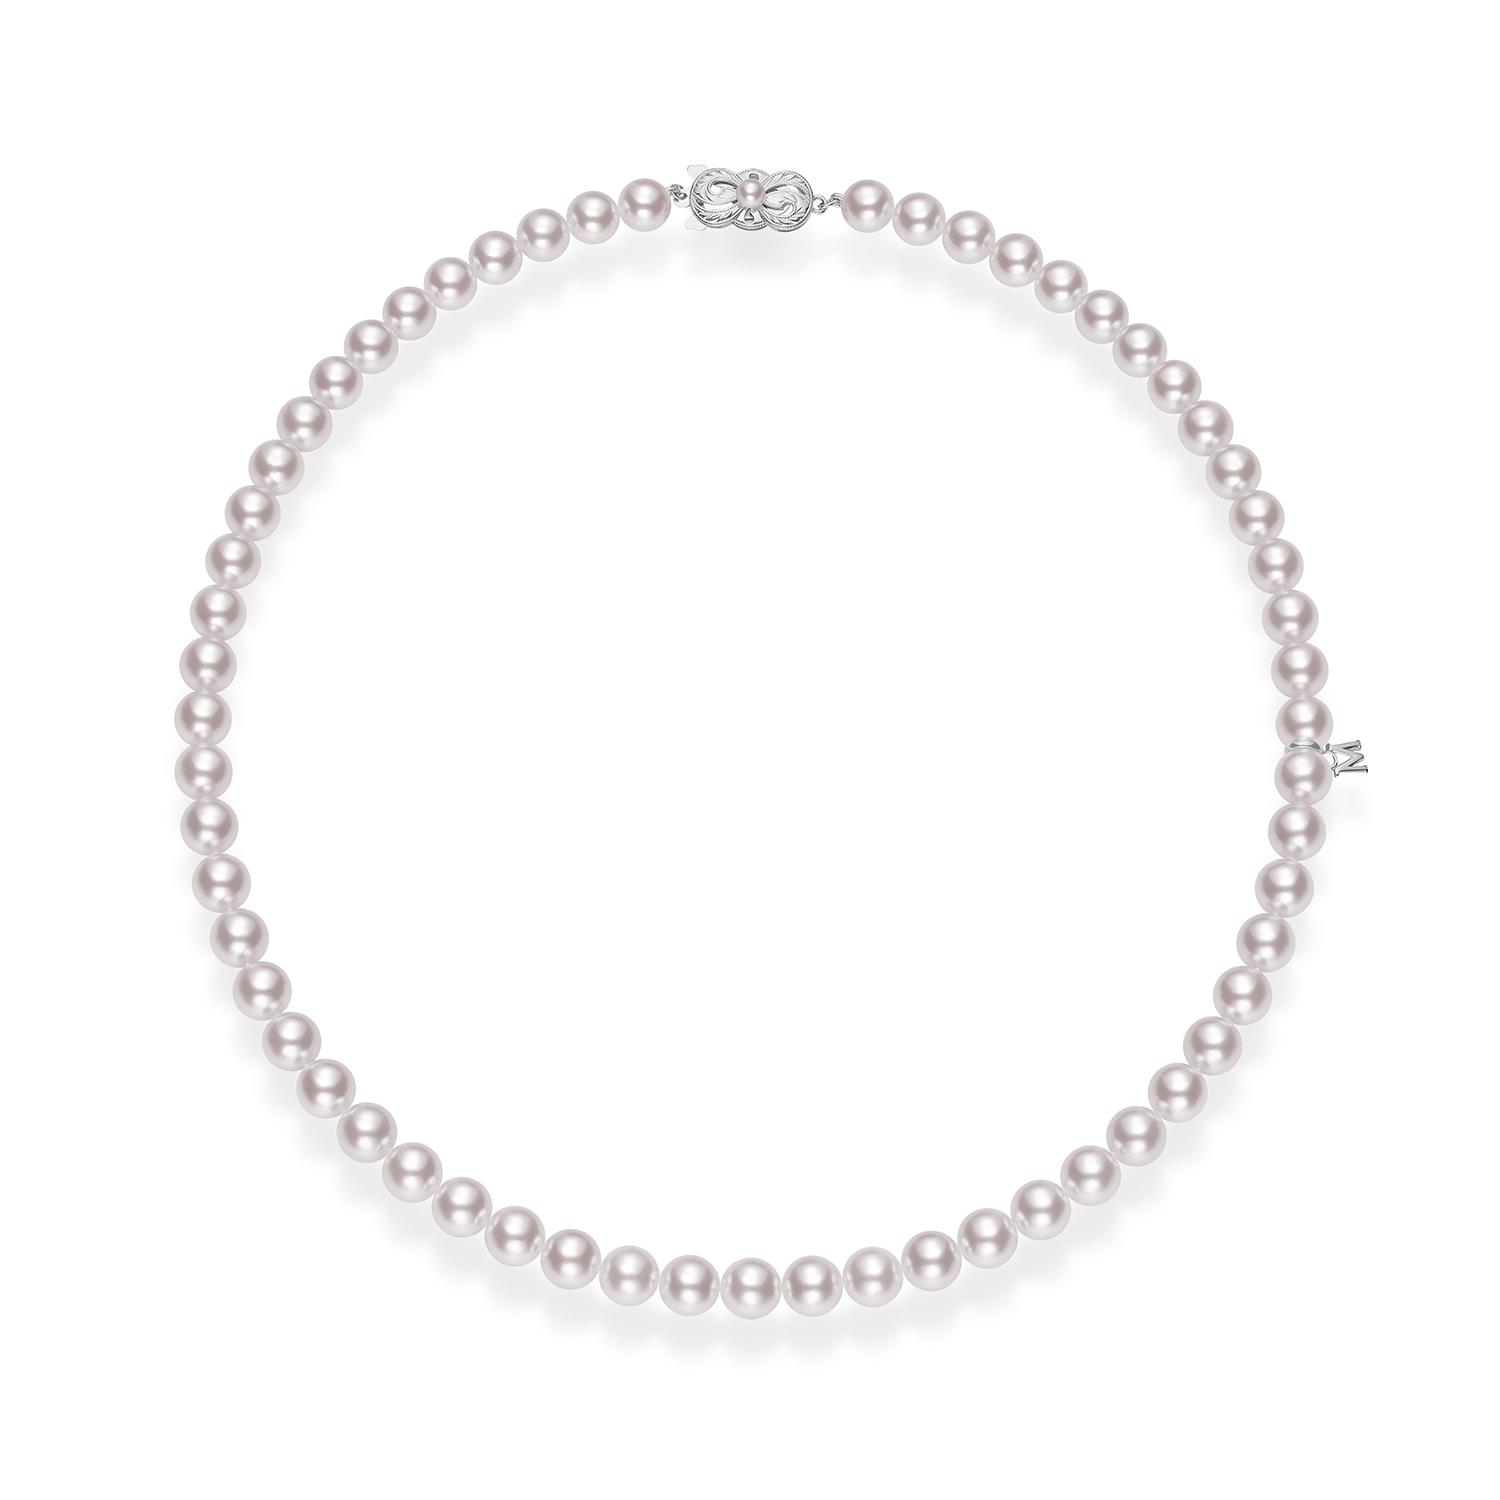 Mikimoto Choker Length Pearl Strand Necklace, 16 inches